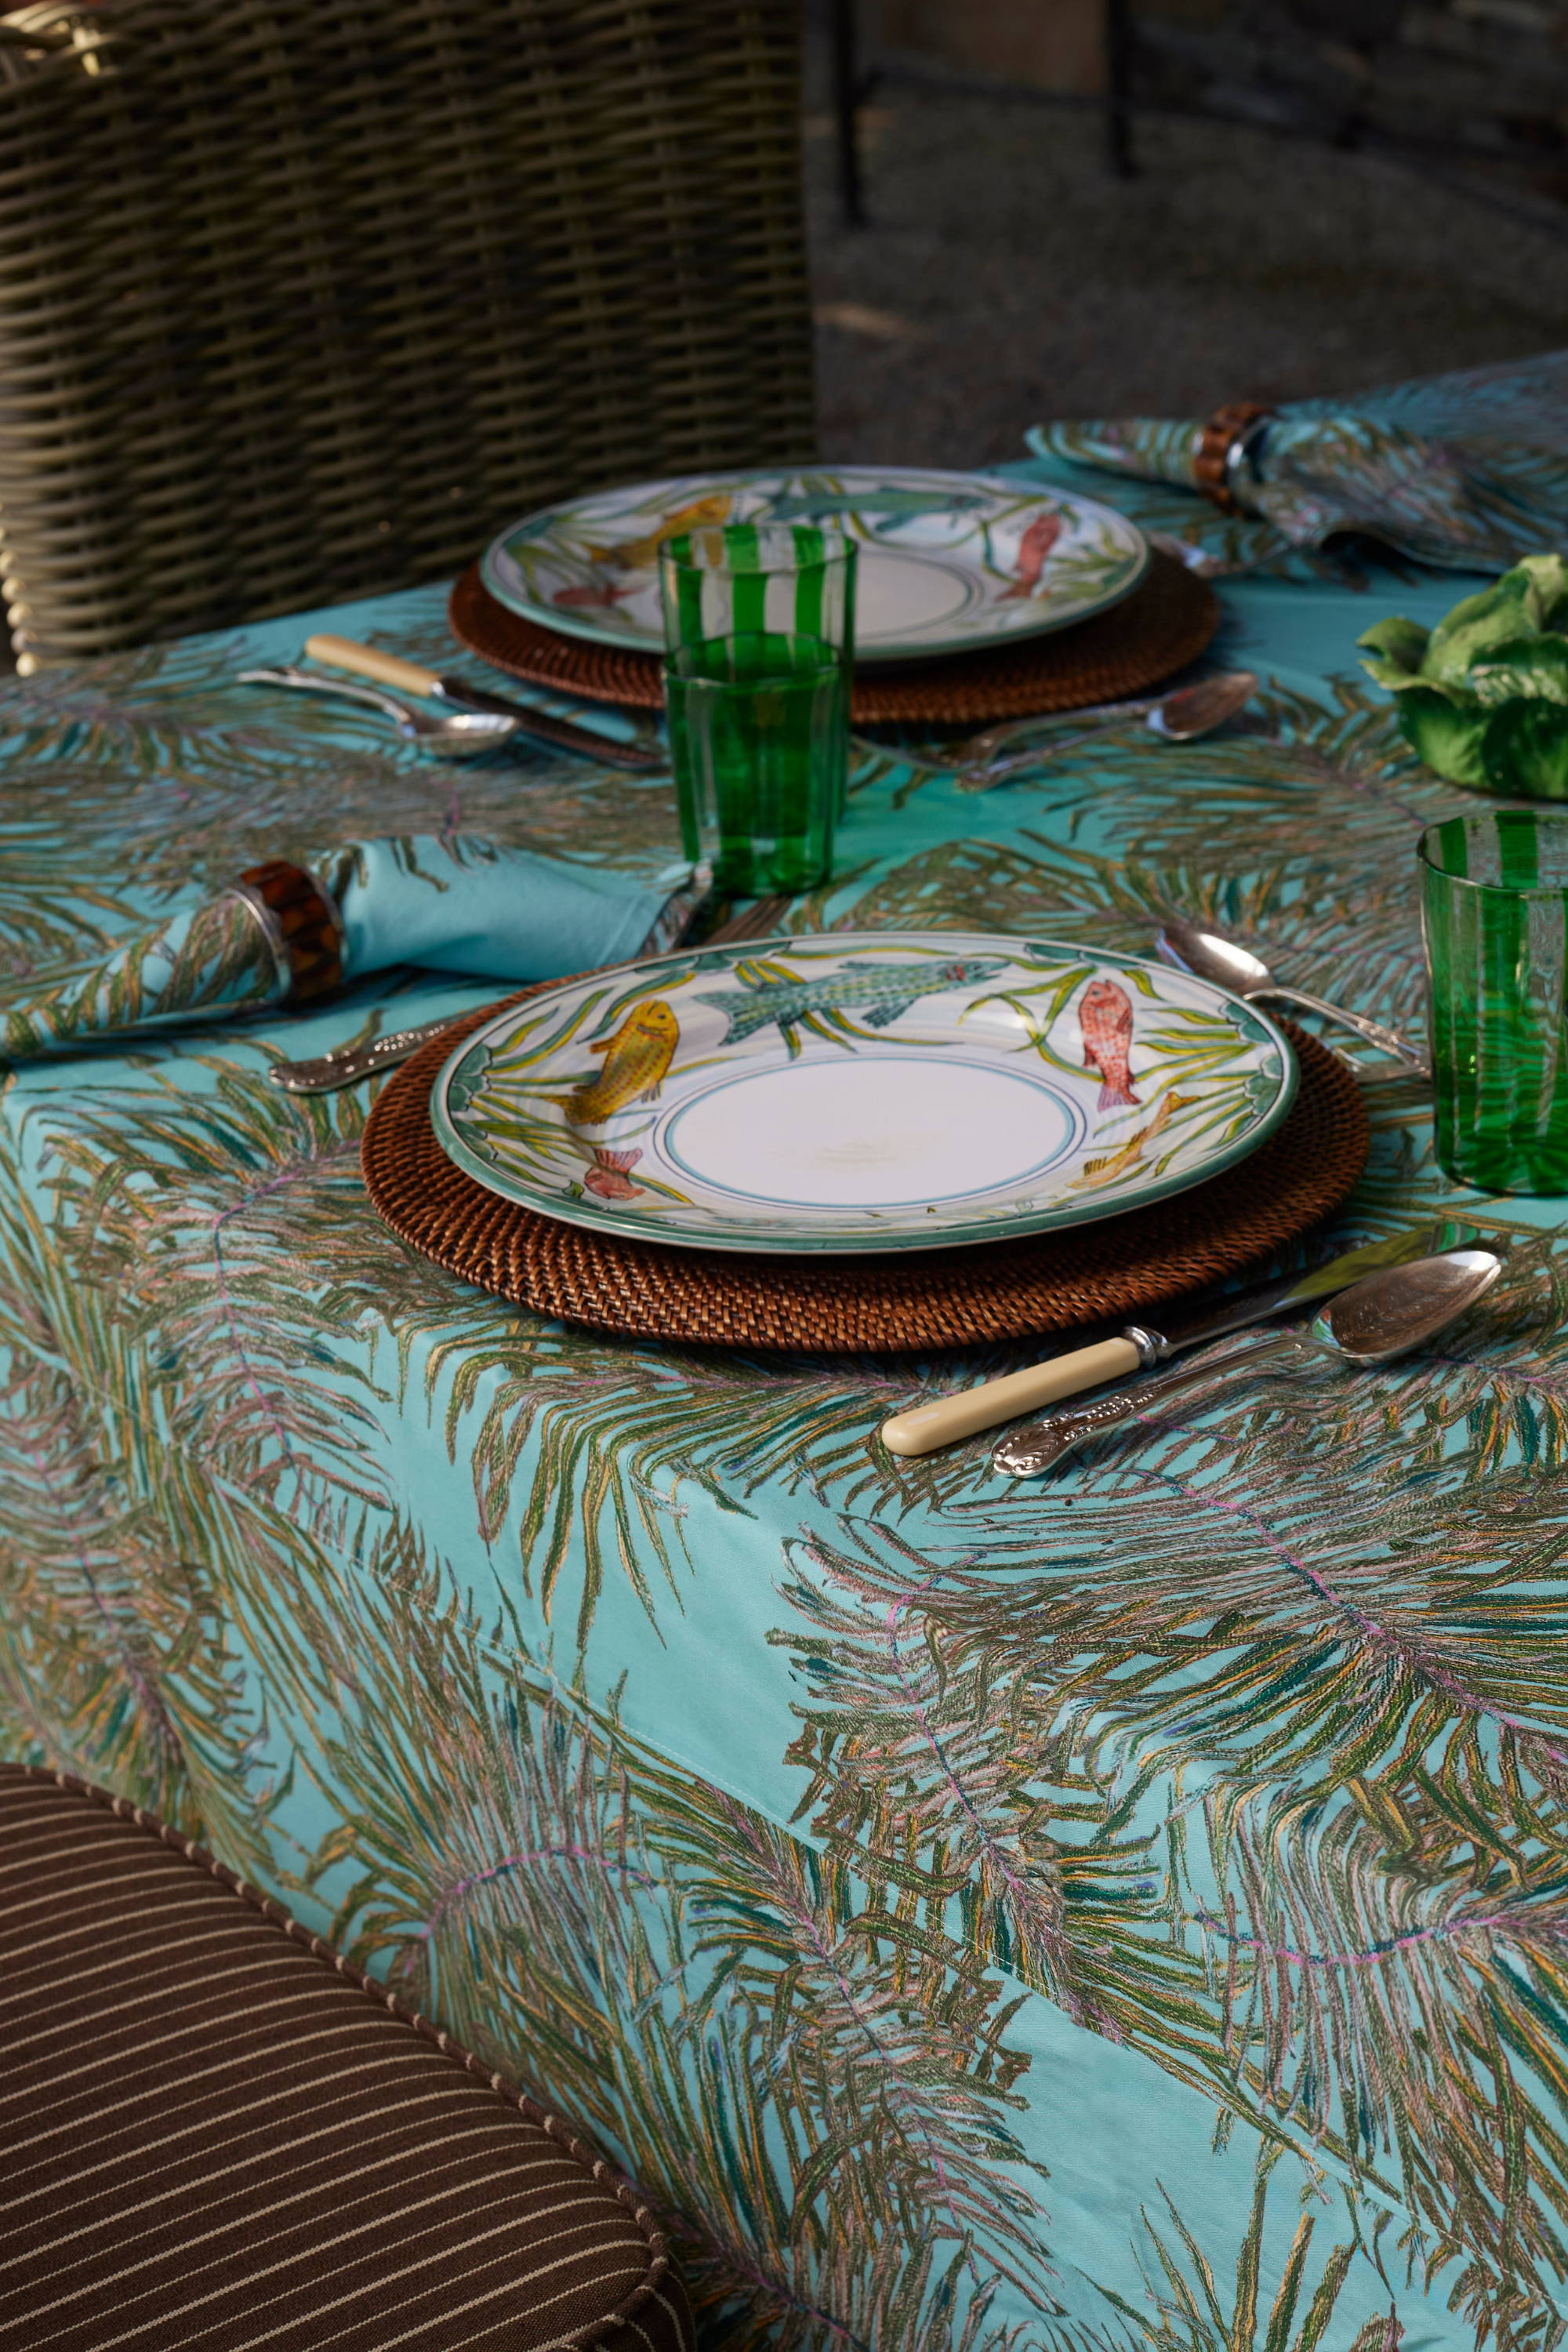 Green cotton table clothing by Ala von Auersperg